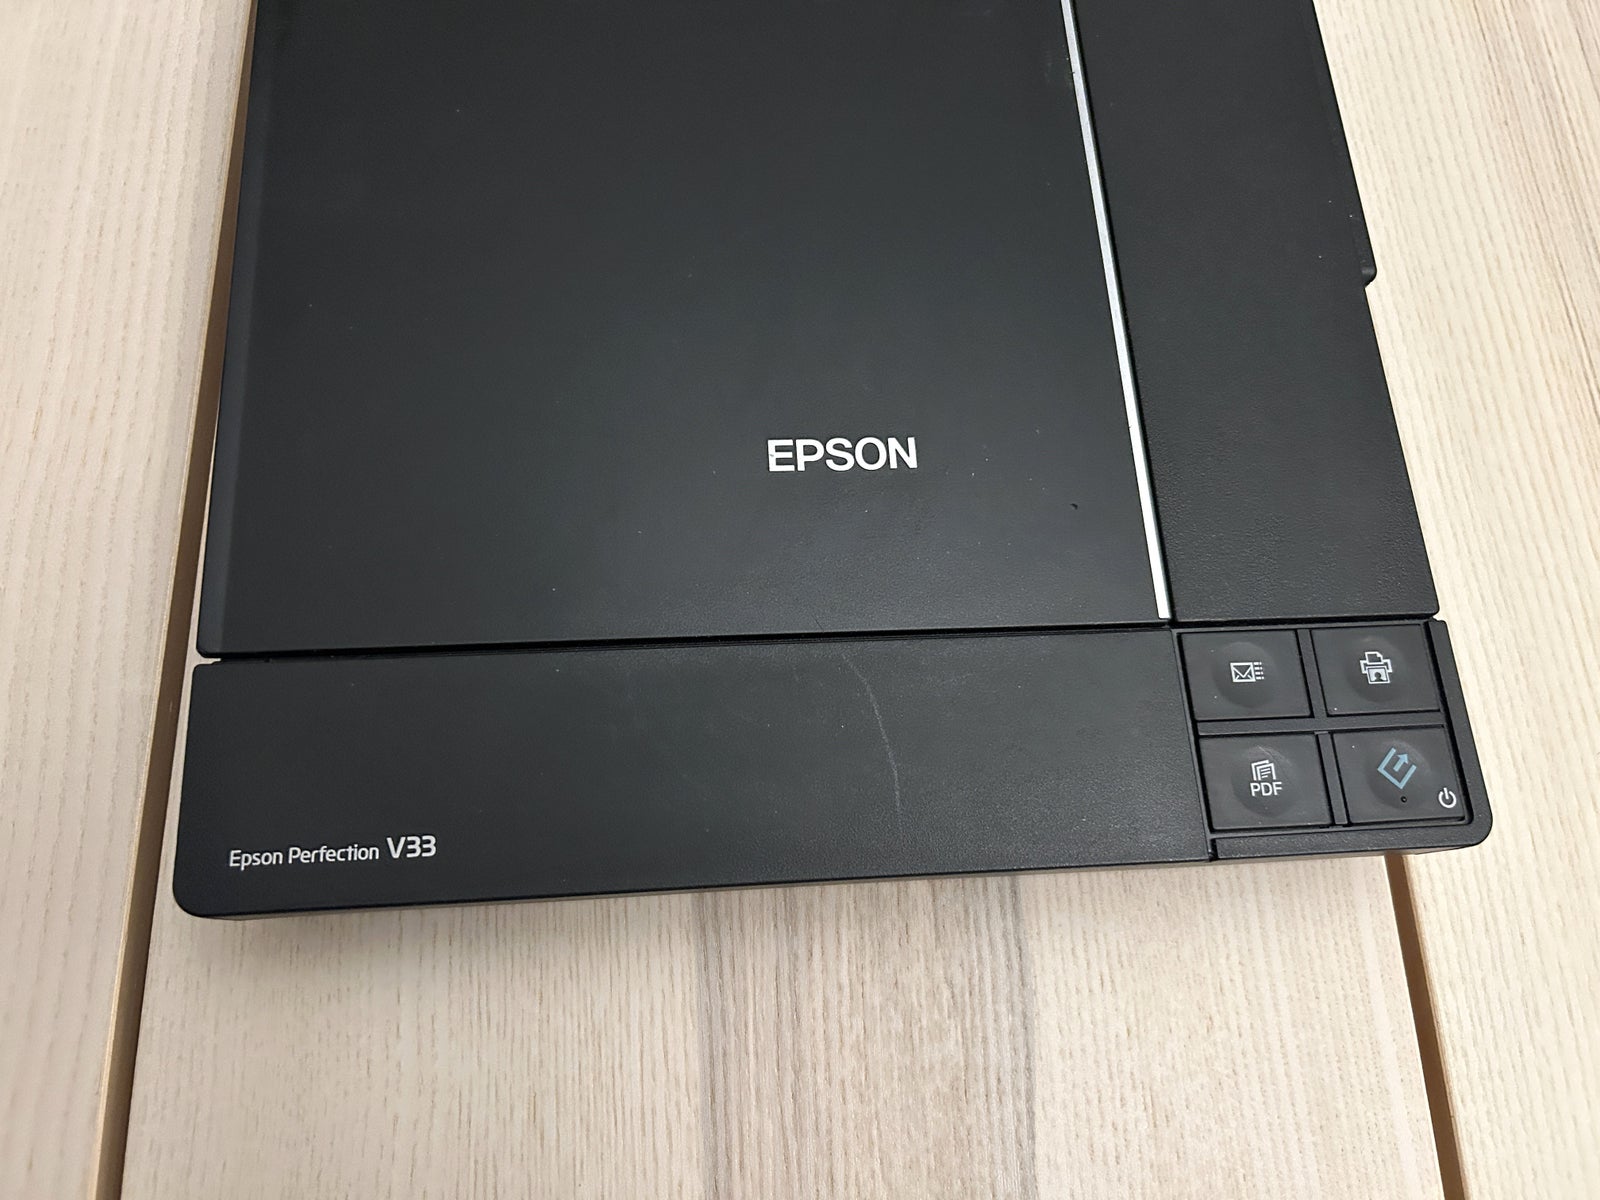 Epson Perfection V33, | Konsumentscanners | Scannere